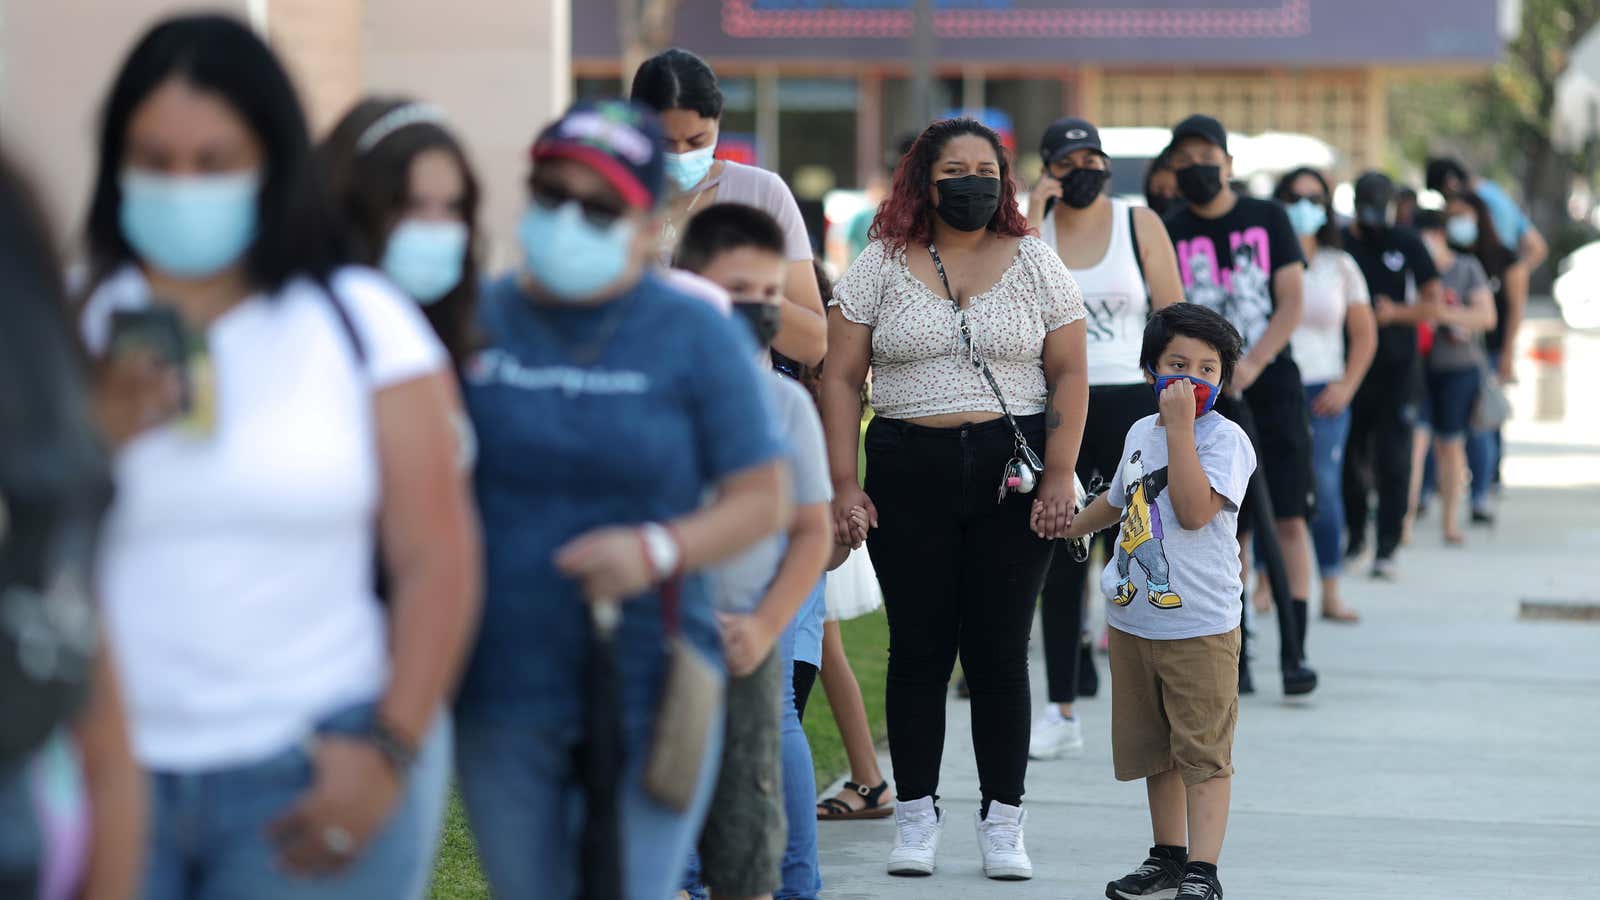 People wait in line for a coronavirus disease (COVID-19) test at a back-to-school clinic in South Gate, Los Angeles, California, U.S., August 12, 2021.